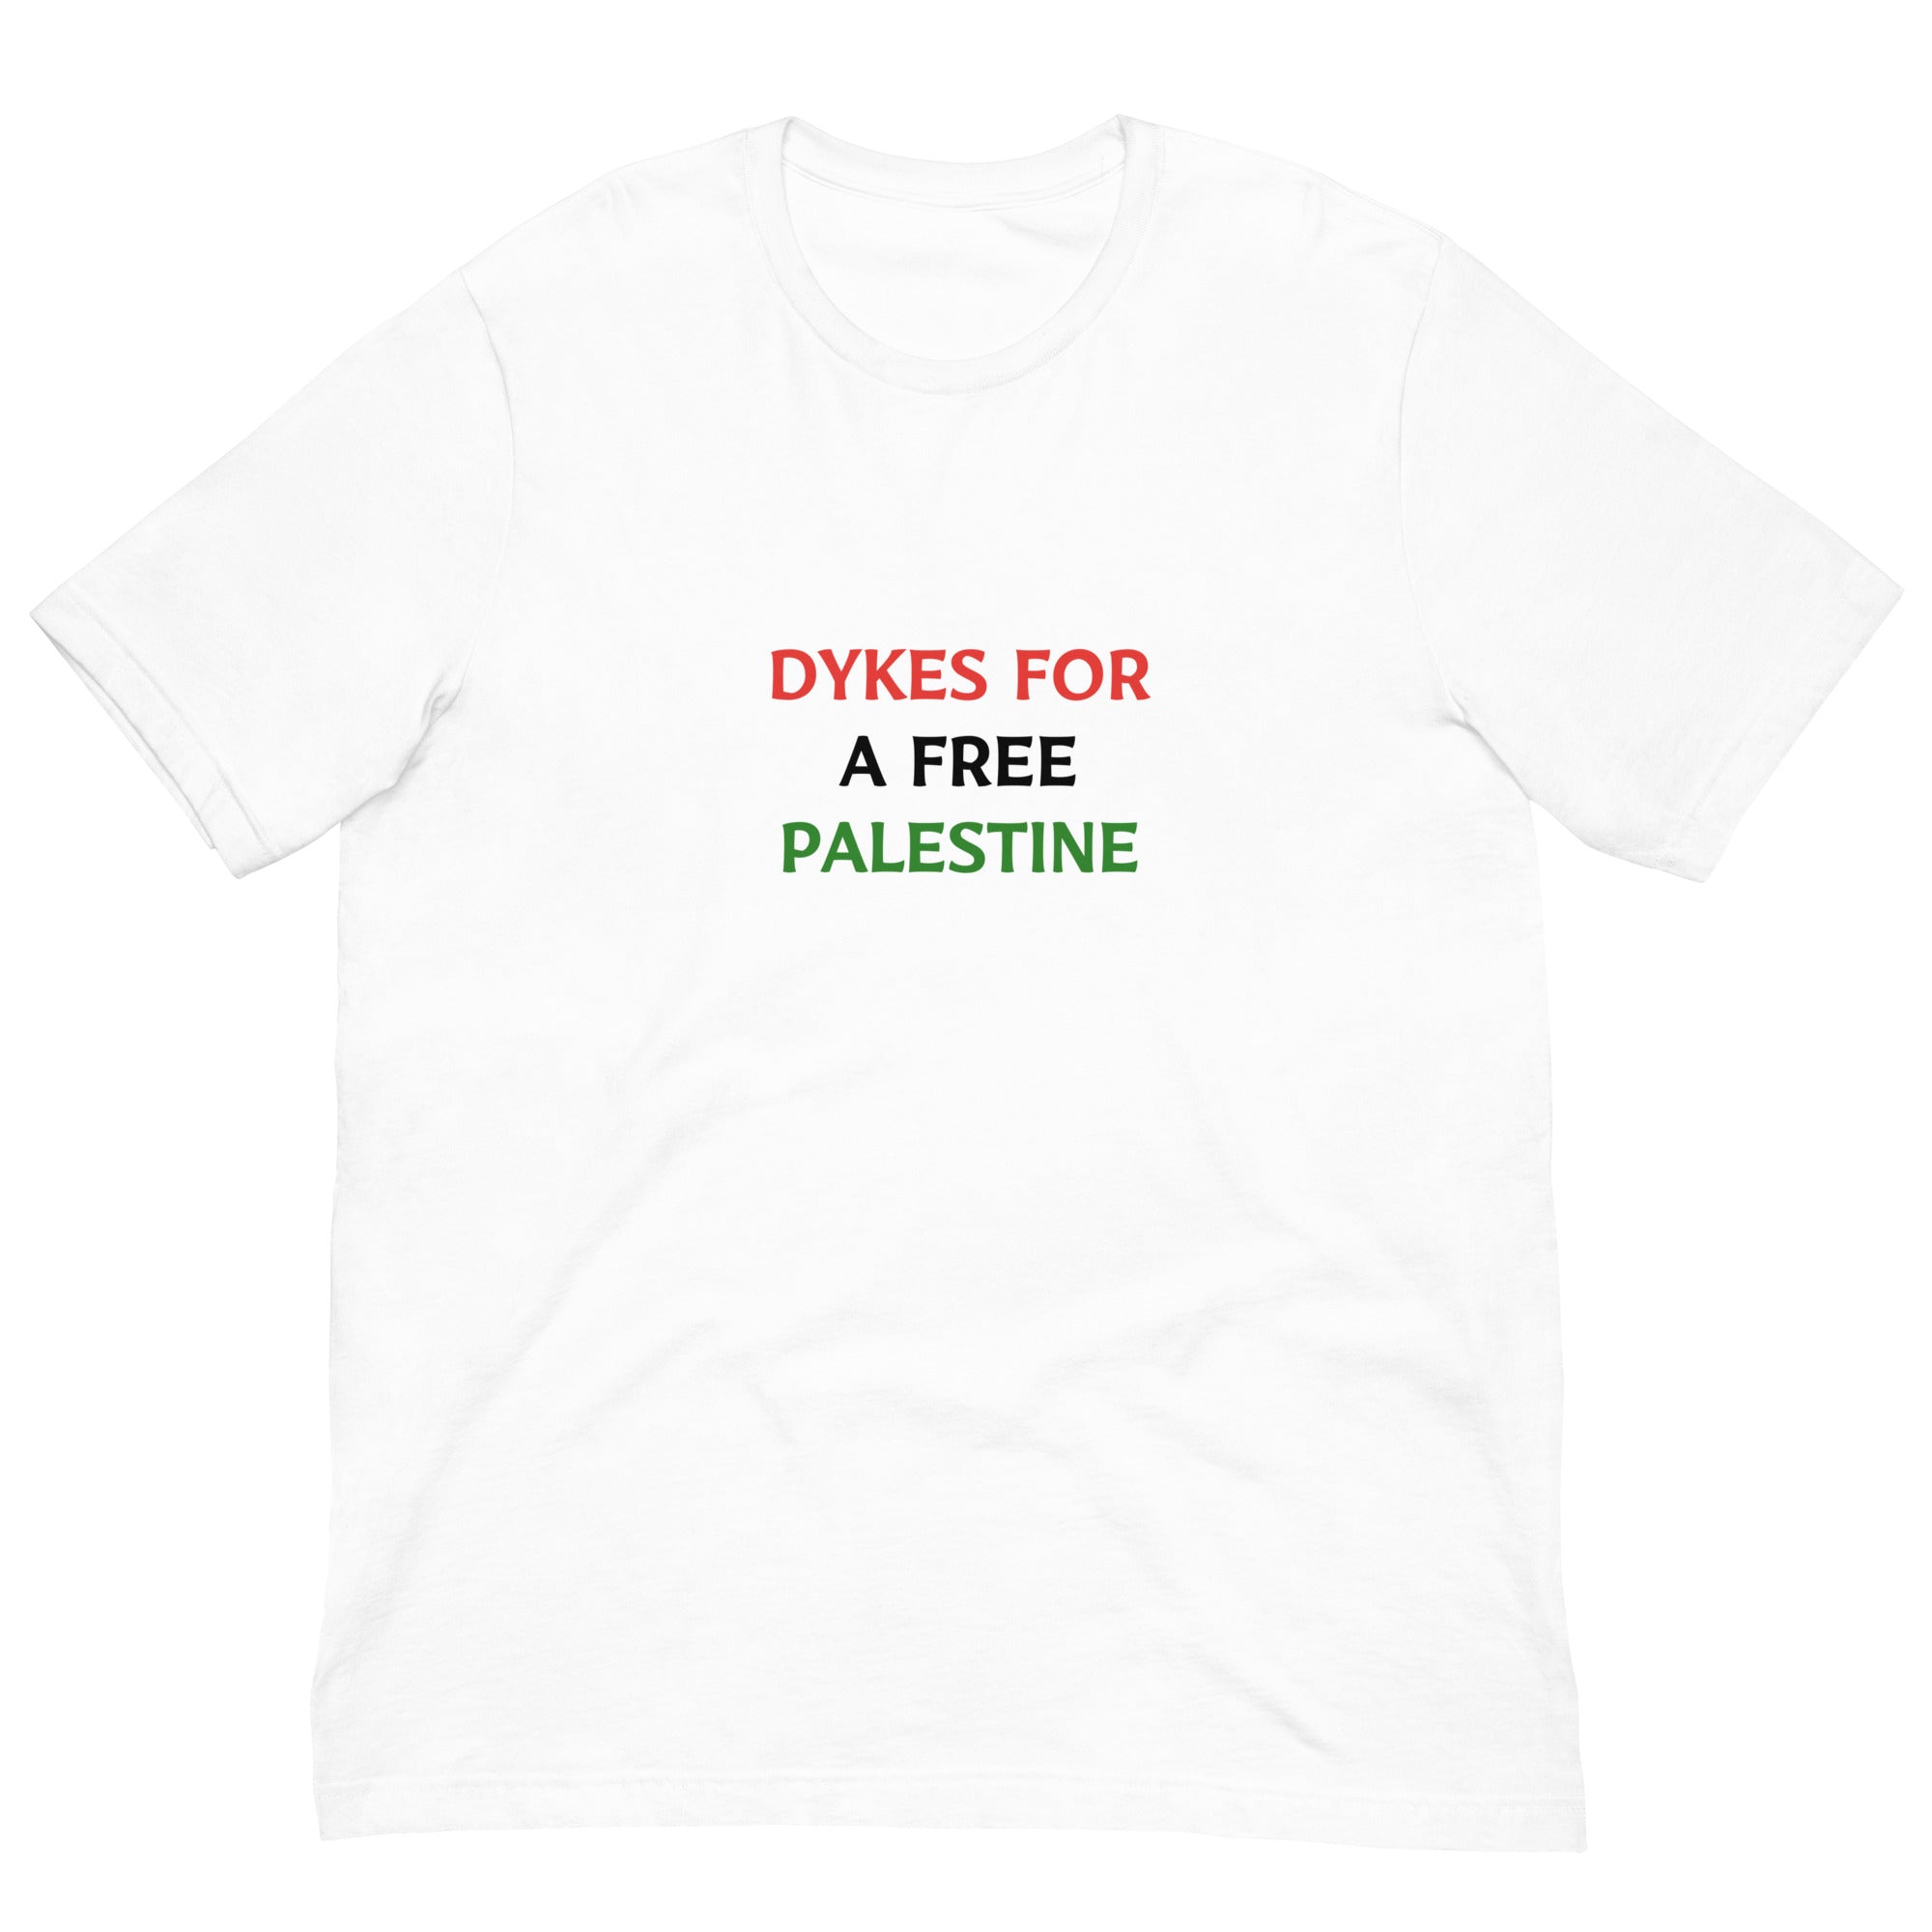 DYKES FOR A FREE PALESTINE t-shirt